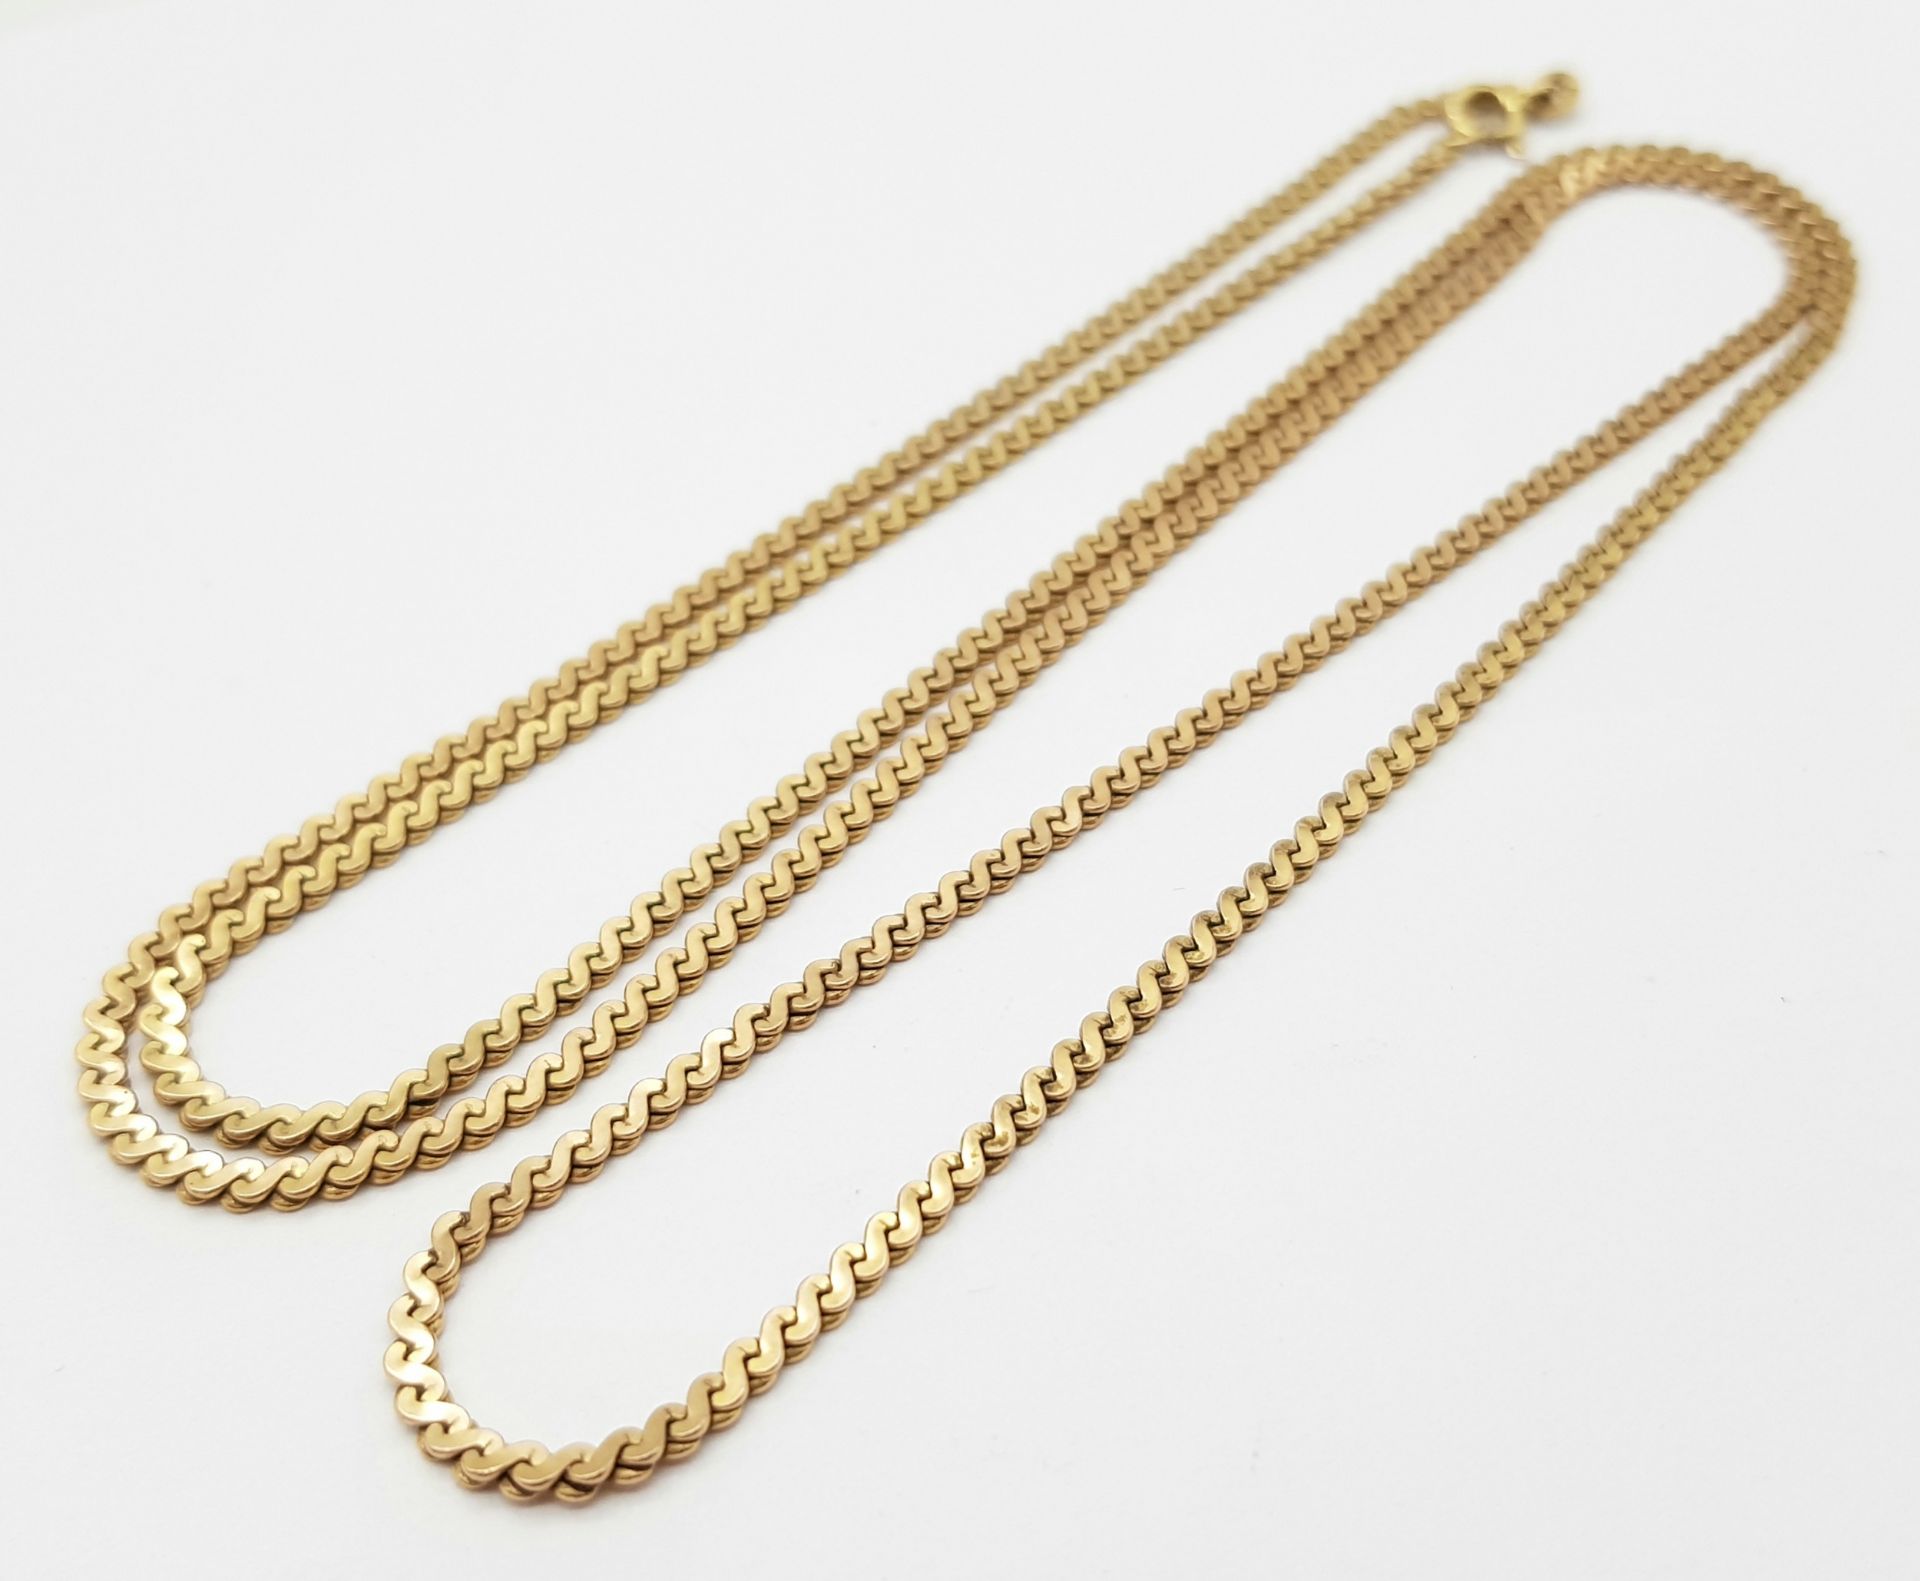 A 9K yellow gold chain necklace, length: 60cm, weight: 15.3g. - Image 4 of 5